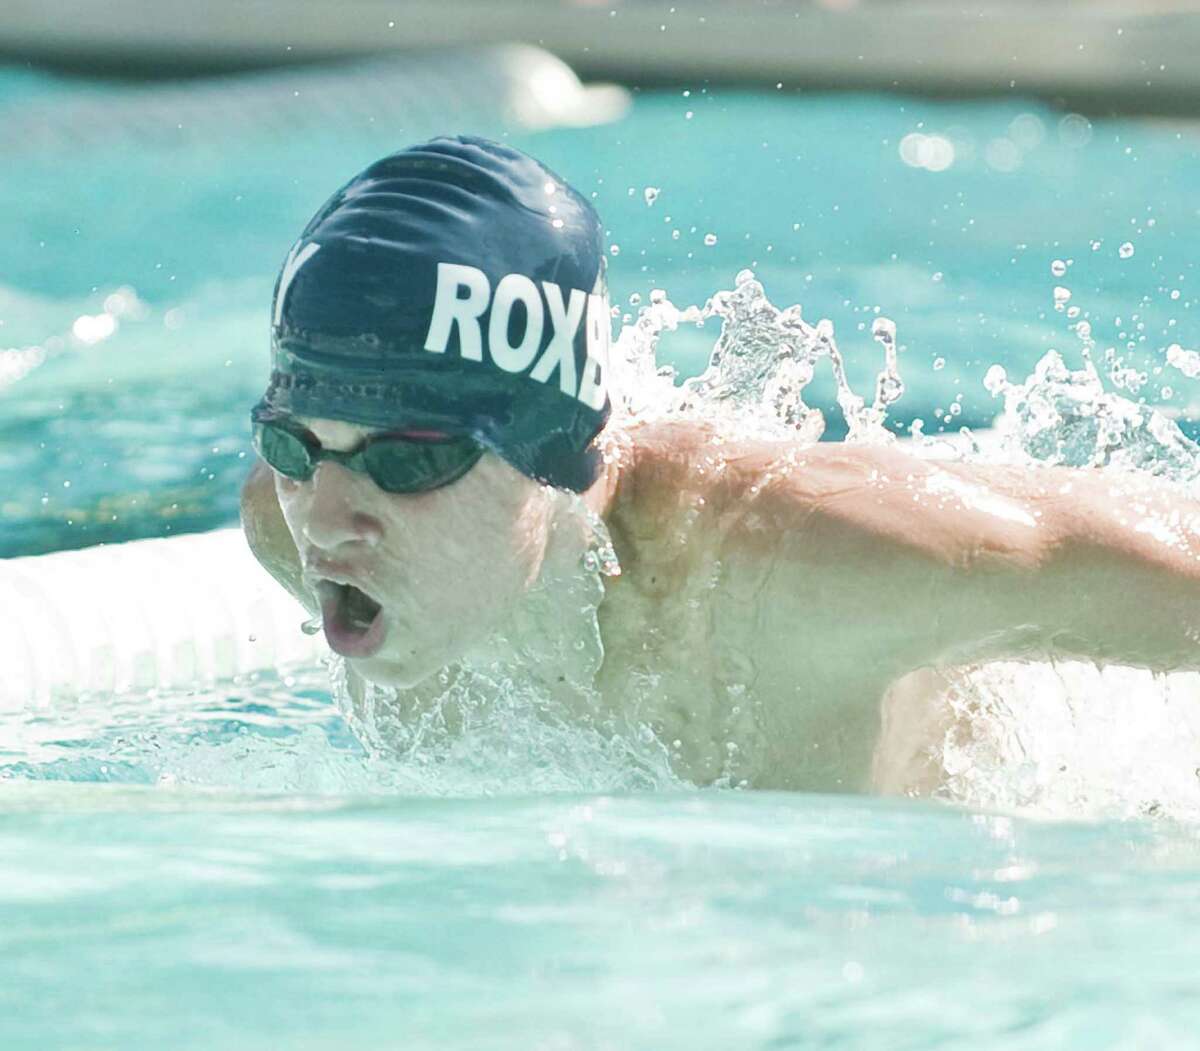 James Pascale of Roxbury Swim & Tennis Club in the 14 and under 50 meter butterfly at the Fairfield County Swim League Championships held at the Roxbury Swim & Tennis Club in Stamford. Saturday, Aug. 13, 2016